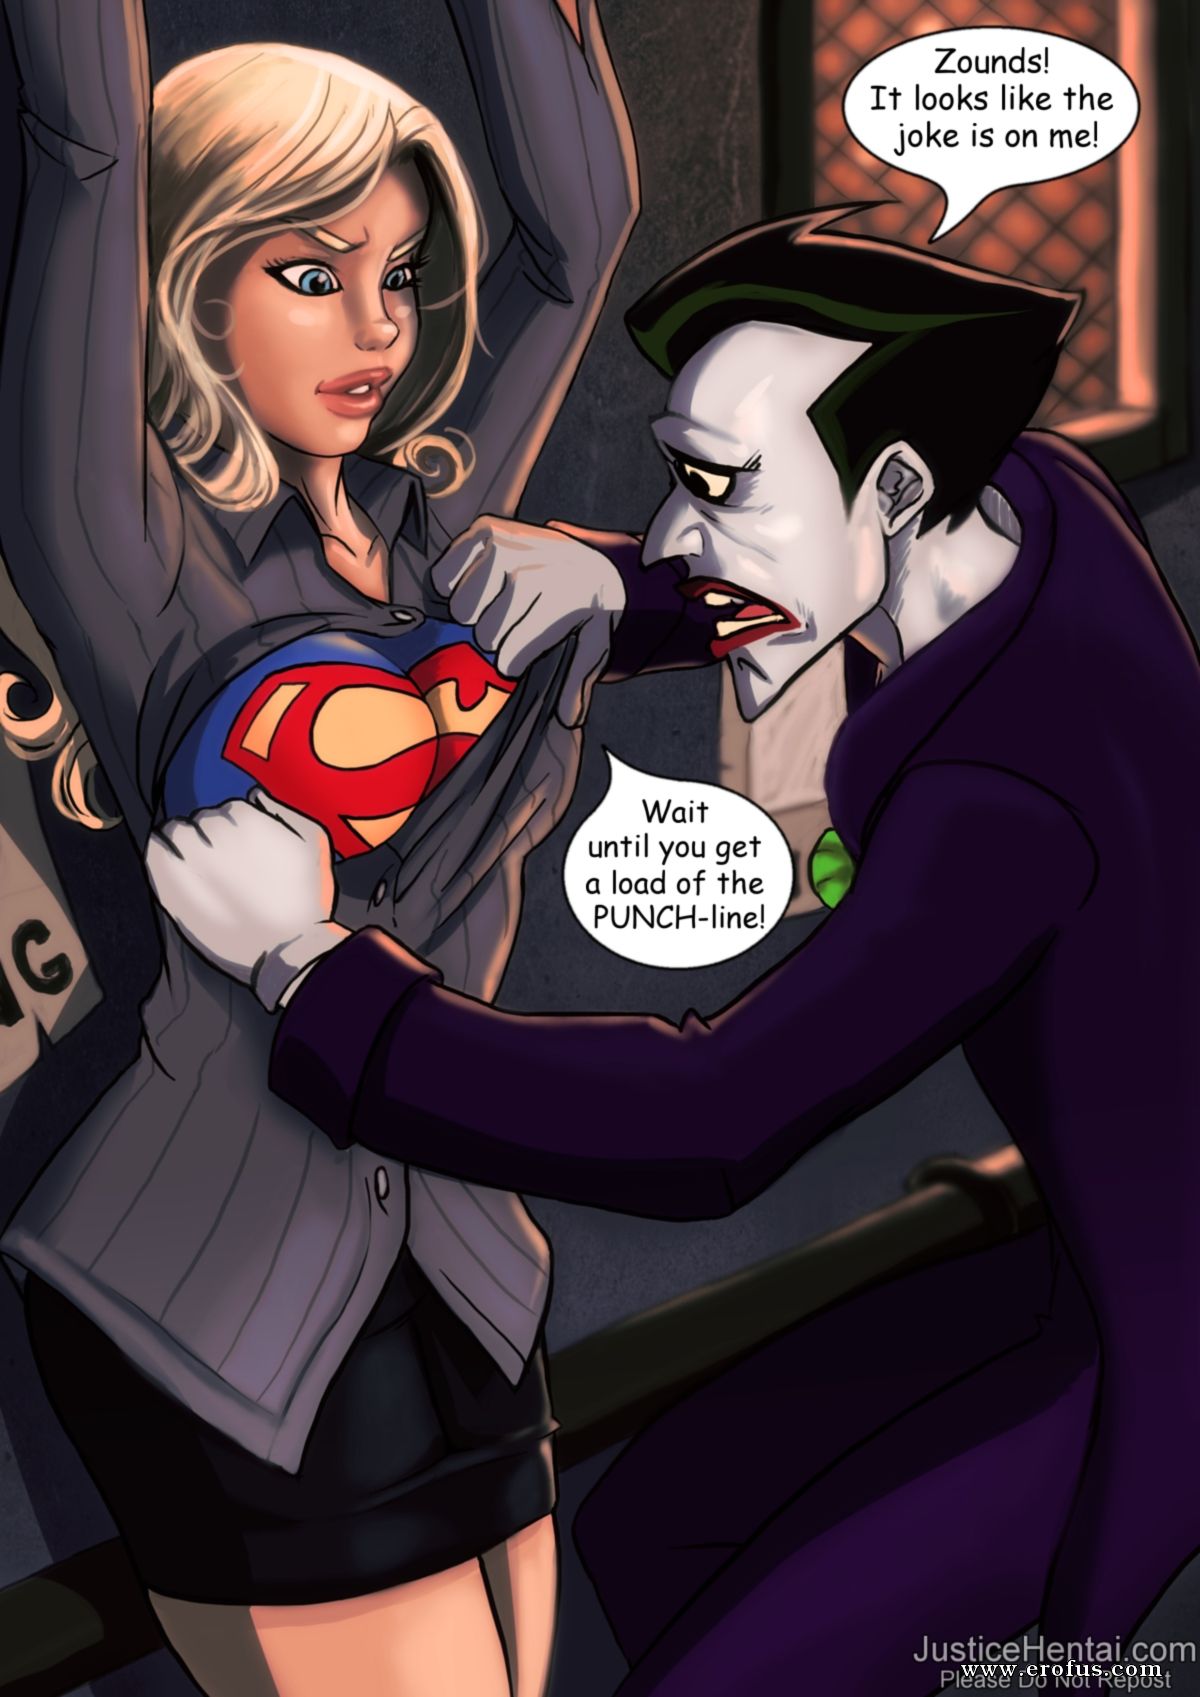 1200px x 1697px - Page 28 | justicehentai_com-comics/galleries/superheroes ...